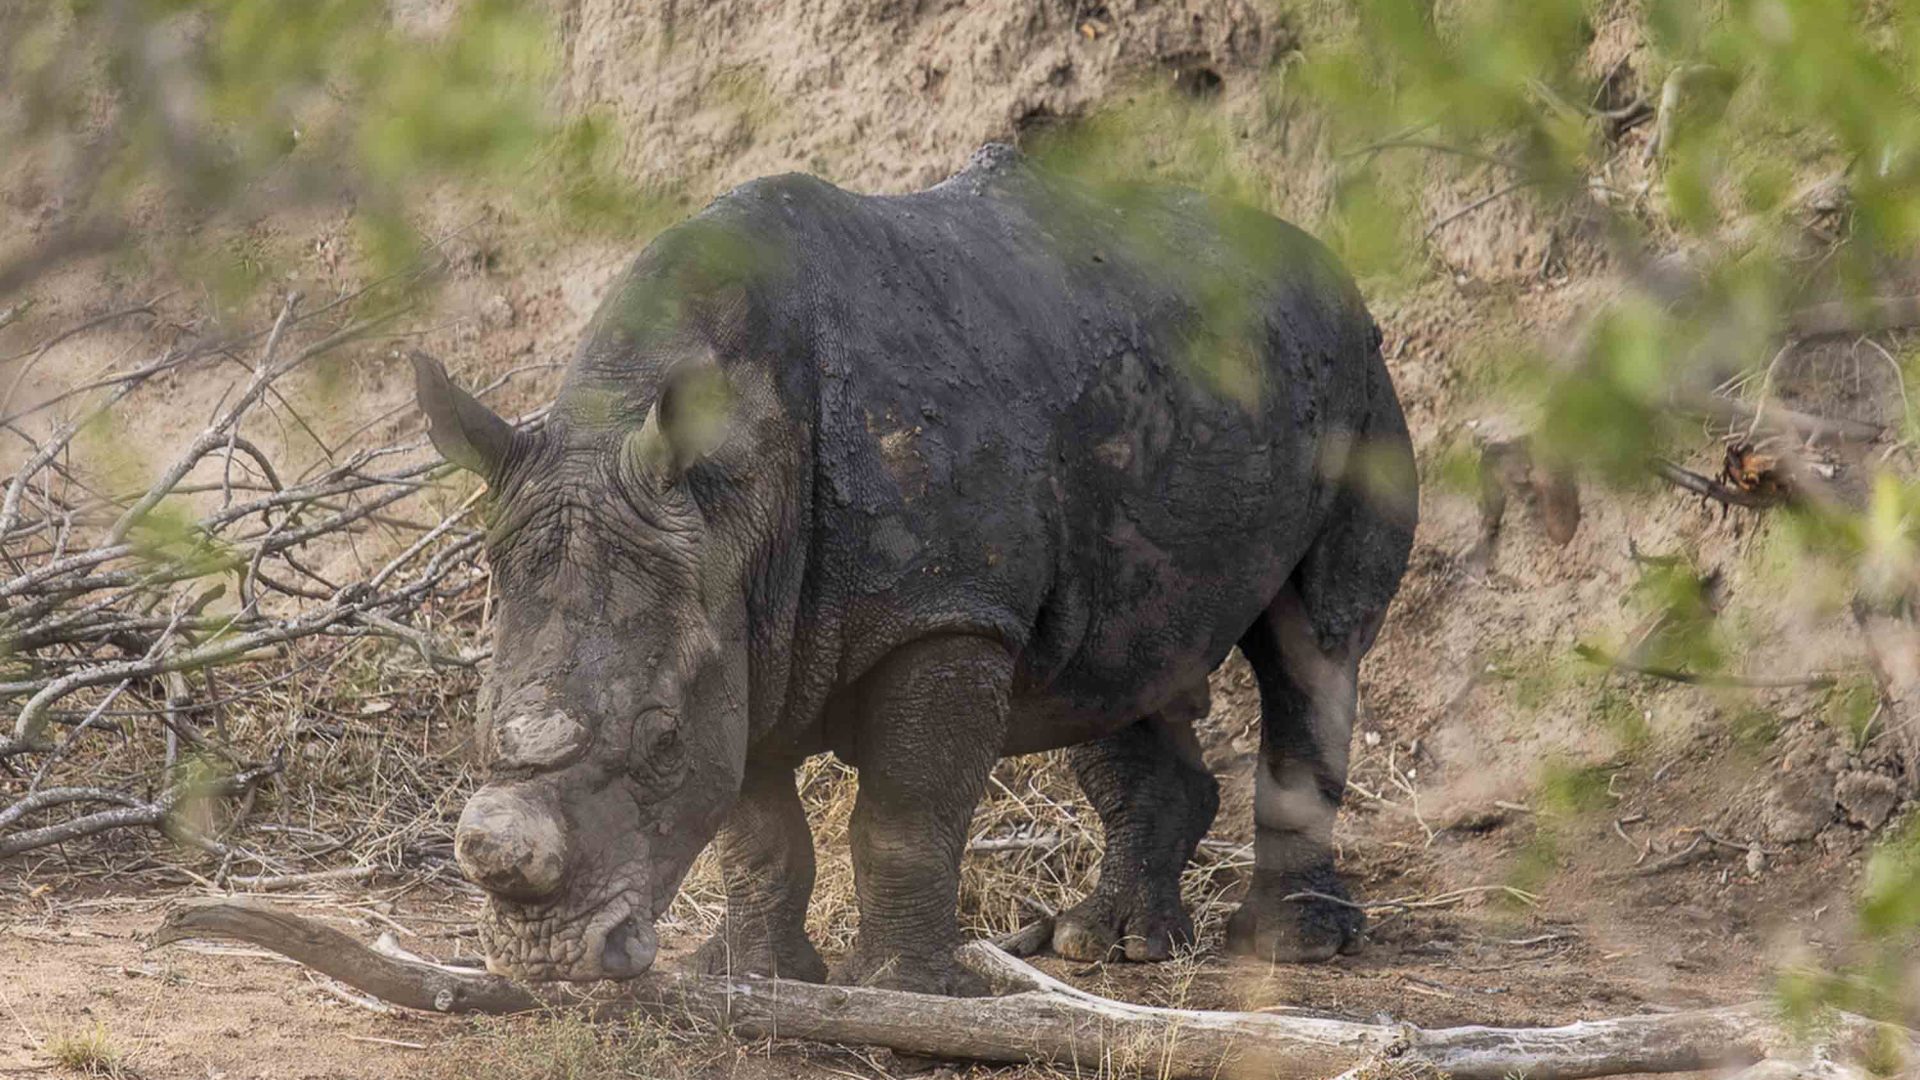 A rhino without a horn.